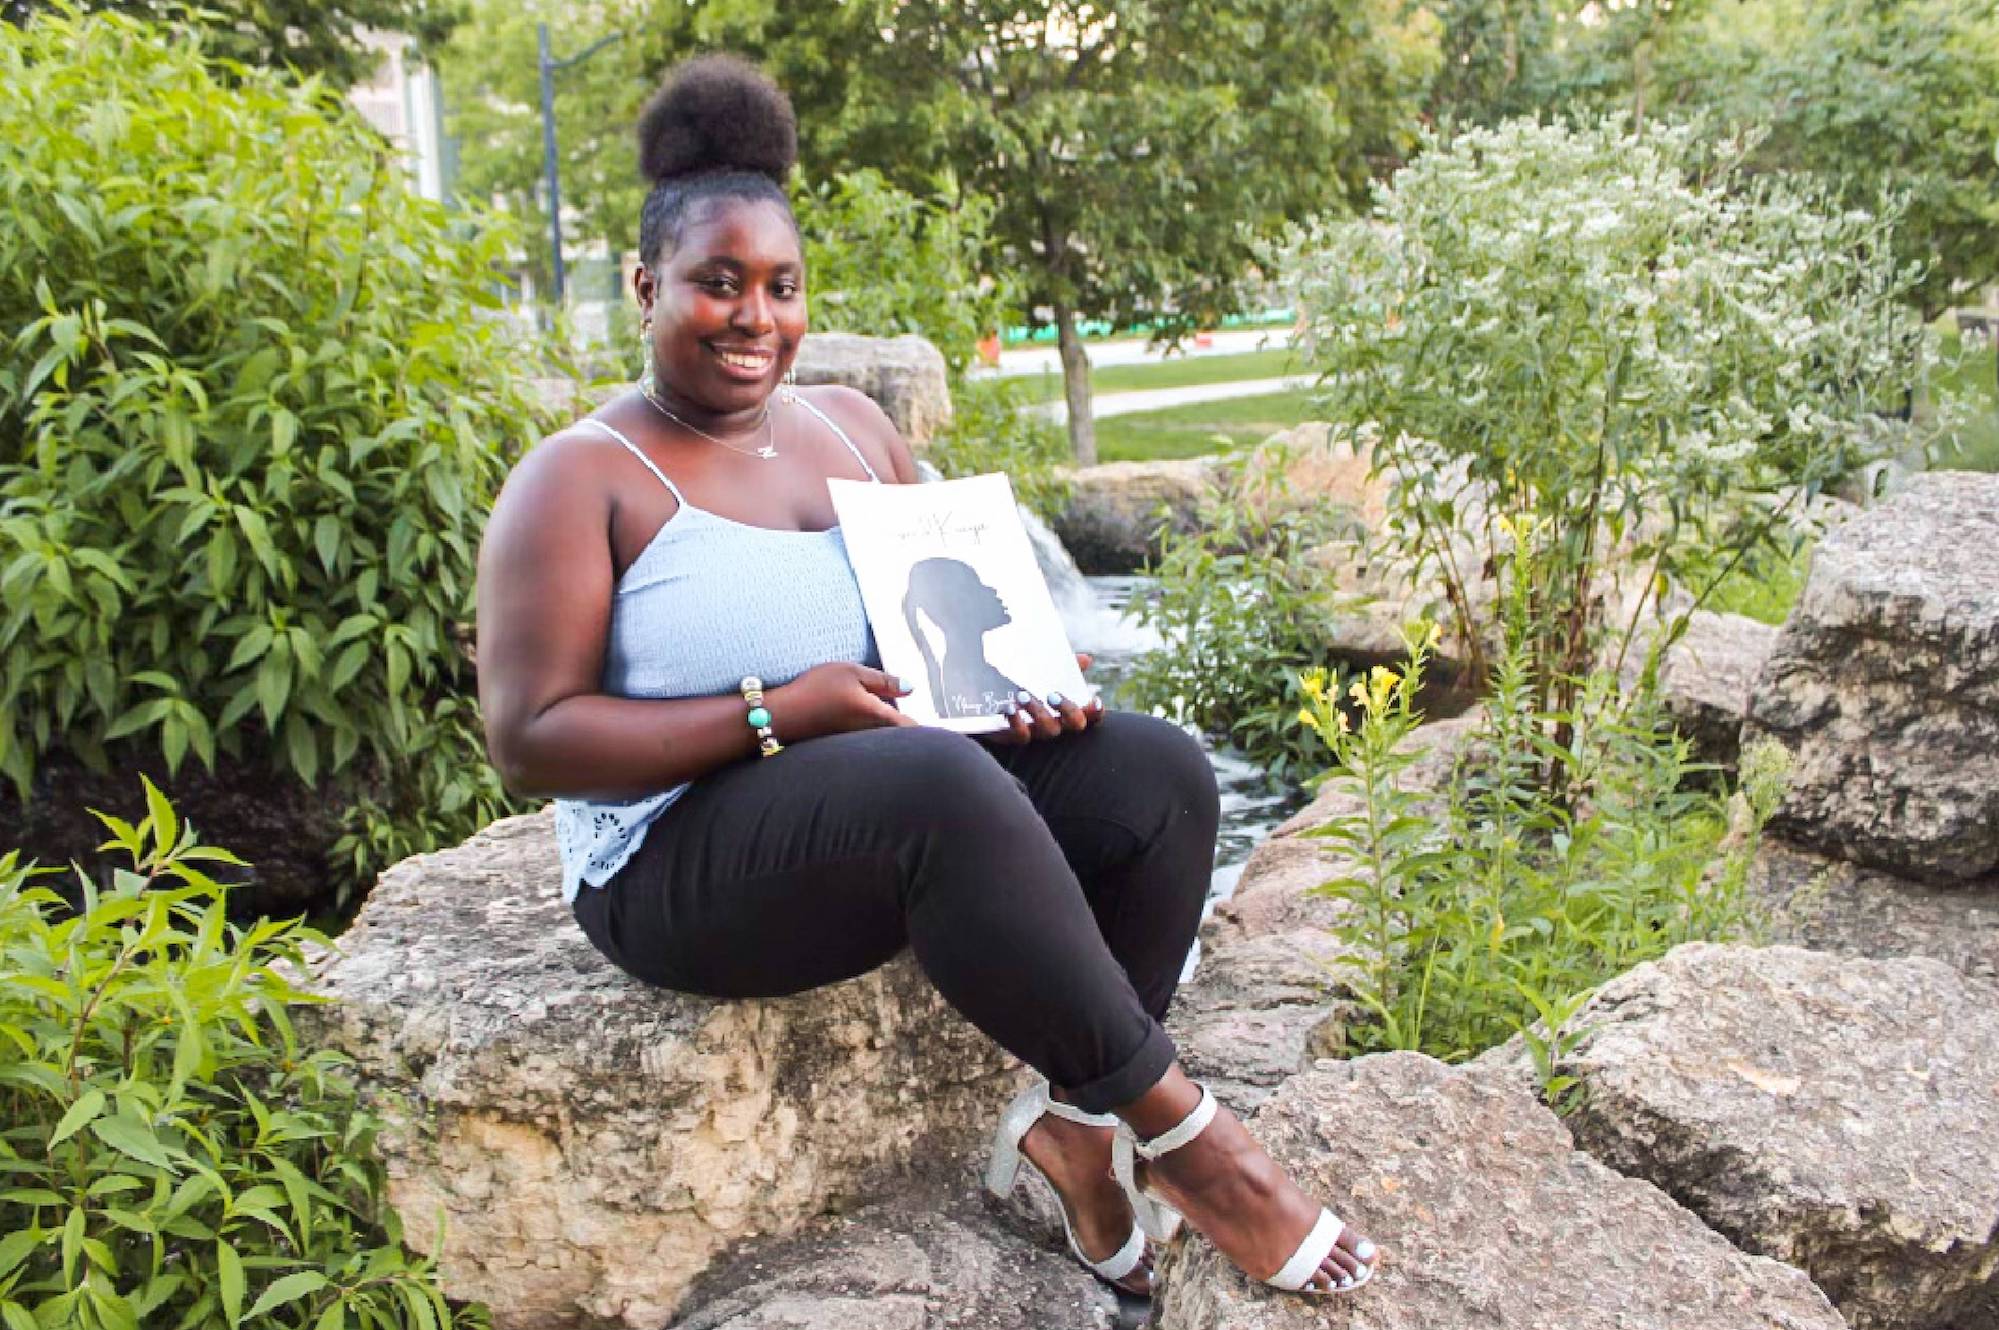 Nikiaya Brandon is a young Black woman. She wears black leggings, white sandal high heels, and a light blue spaghetti strap top. Her hair is in a poof on top of her head. She is sitting on a large rock outside at a beautiful park, holding her poetry book. The book is a large softcover. It has a white background with a profile silhouette of a Black woman, with her chin pointed upwards and a long brain hanging from a pony tail.